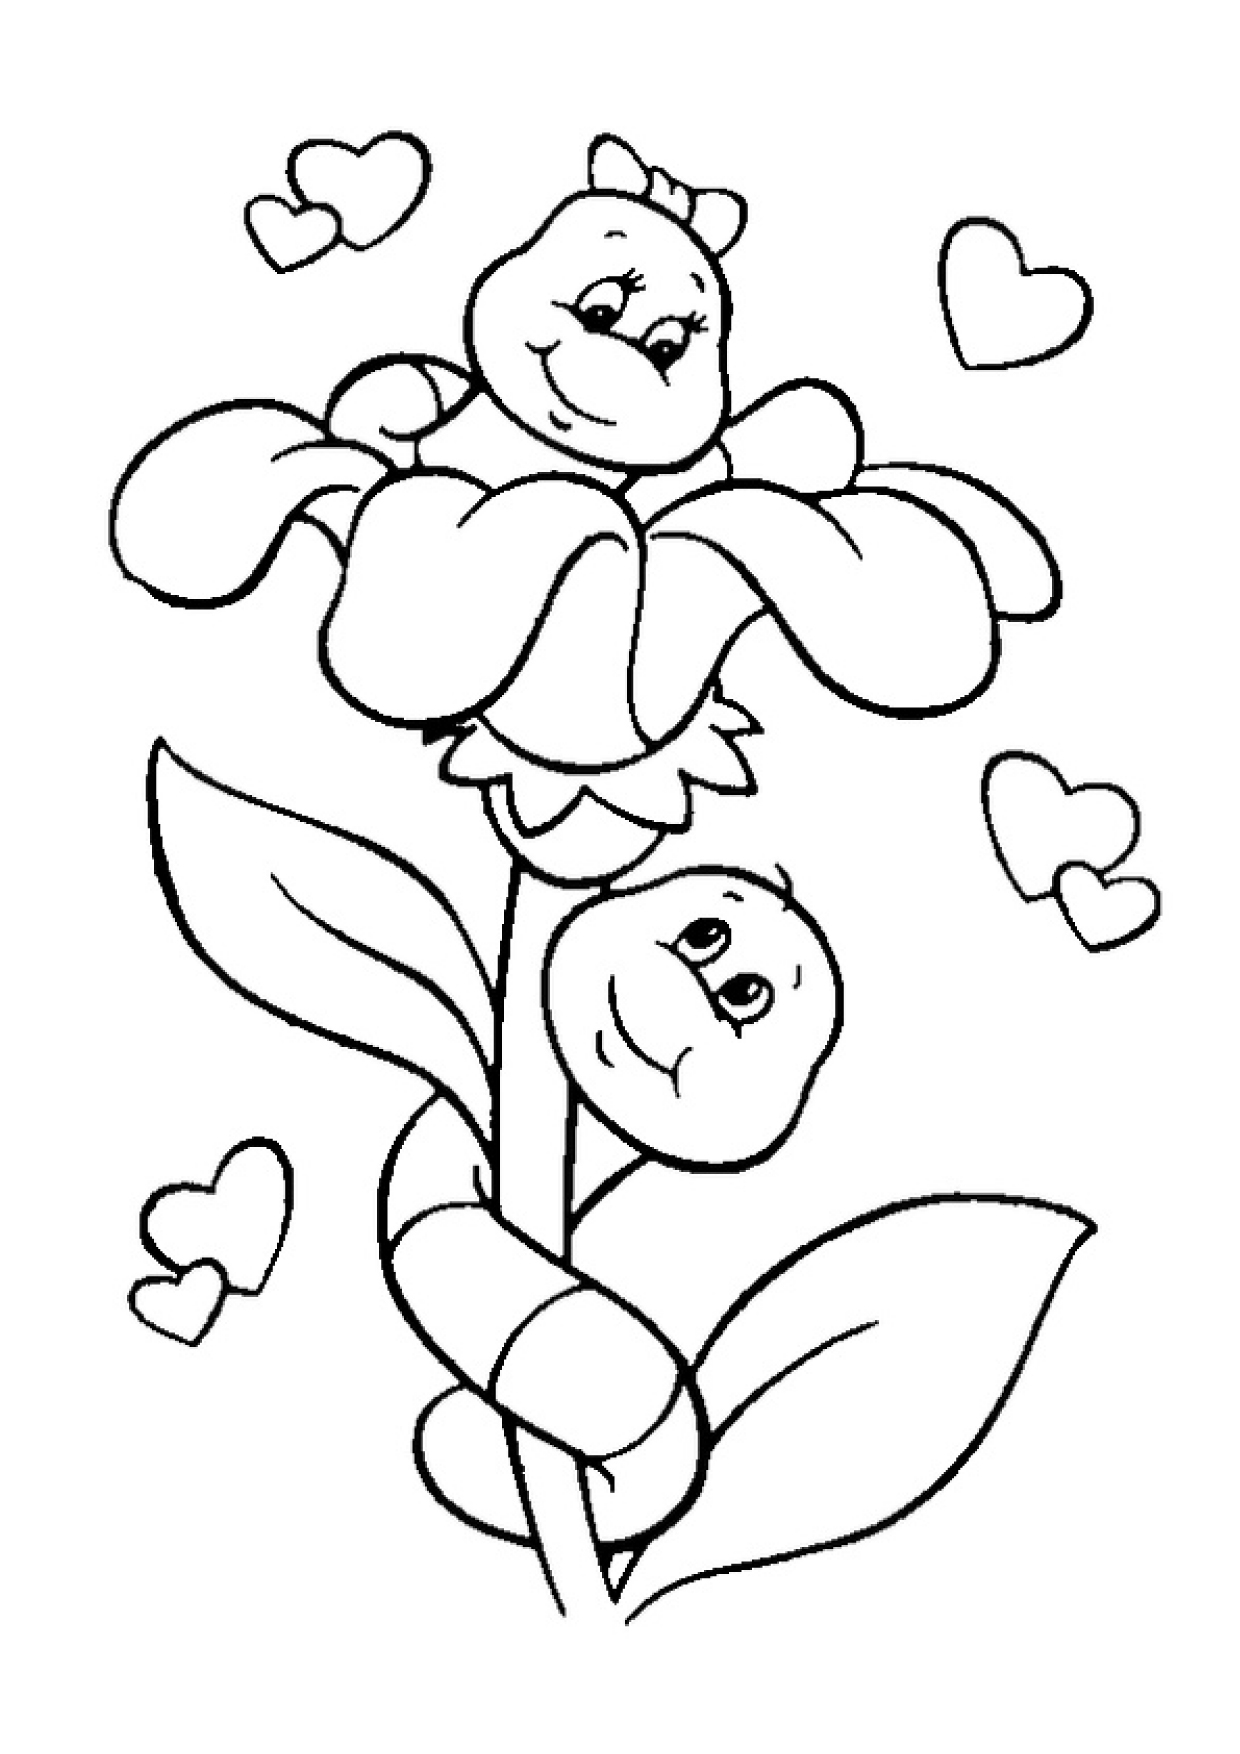 camden valentines day coloring pages for kids - photo #5